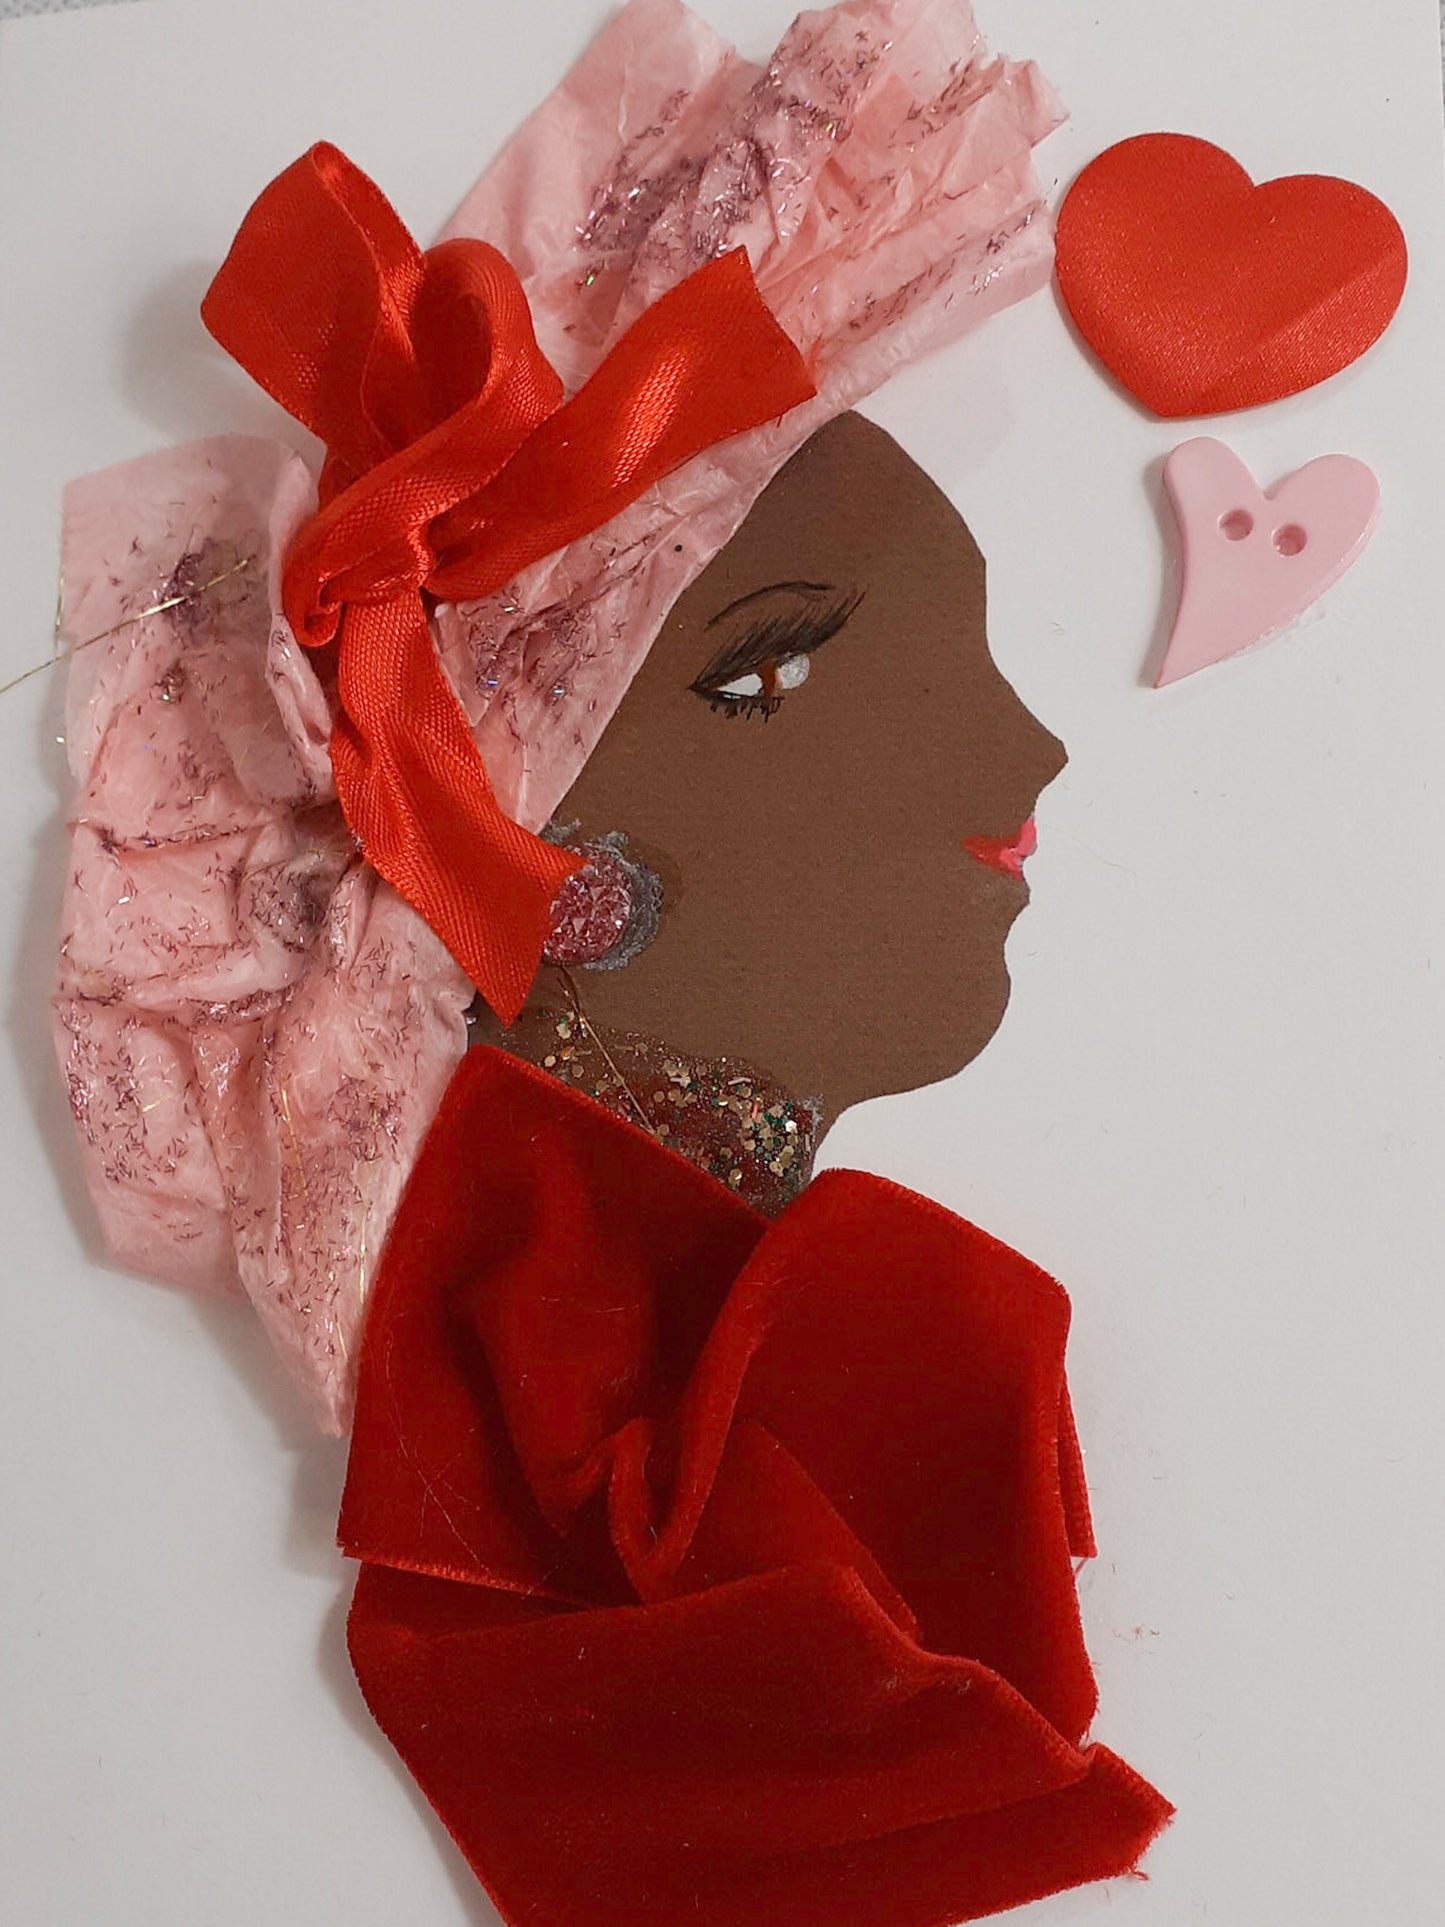 This card is given the name Love. Love wears a red velvet blouse and a light pink tissue paper headdress with a satin bow on it. In the top right corner, there is one red heart and one pink heart. 